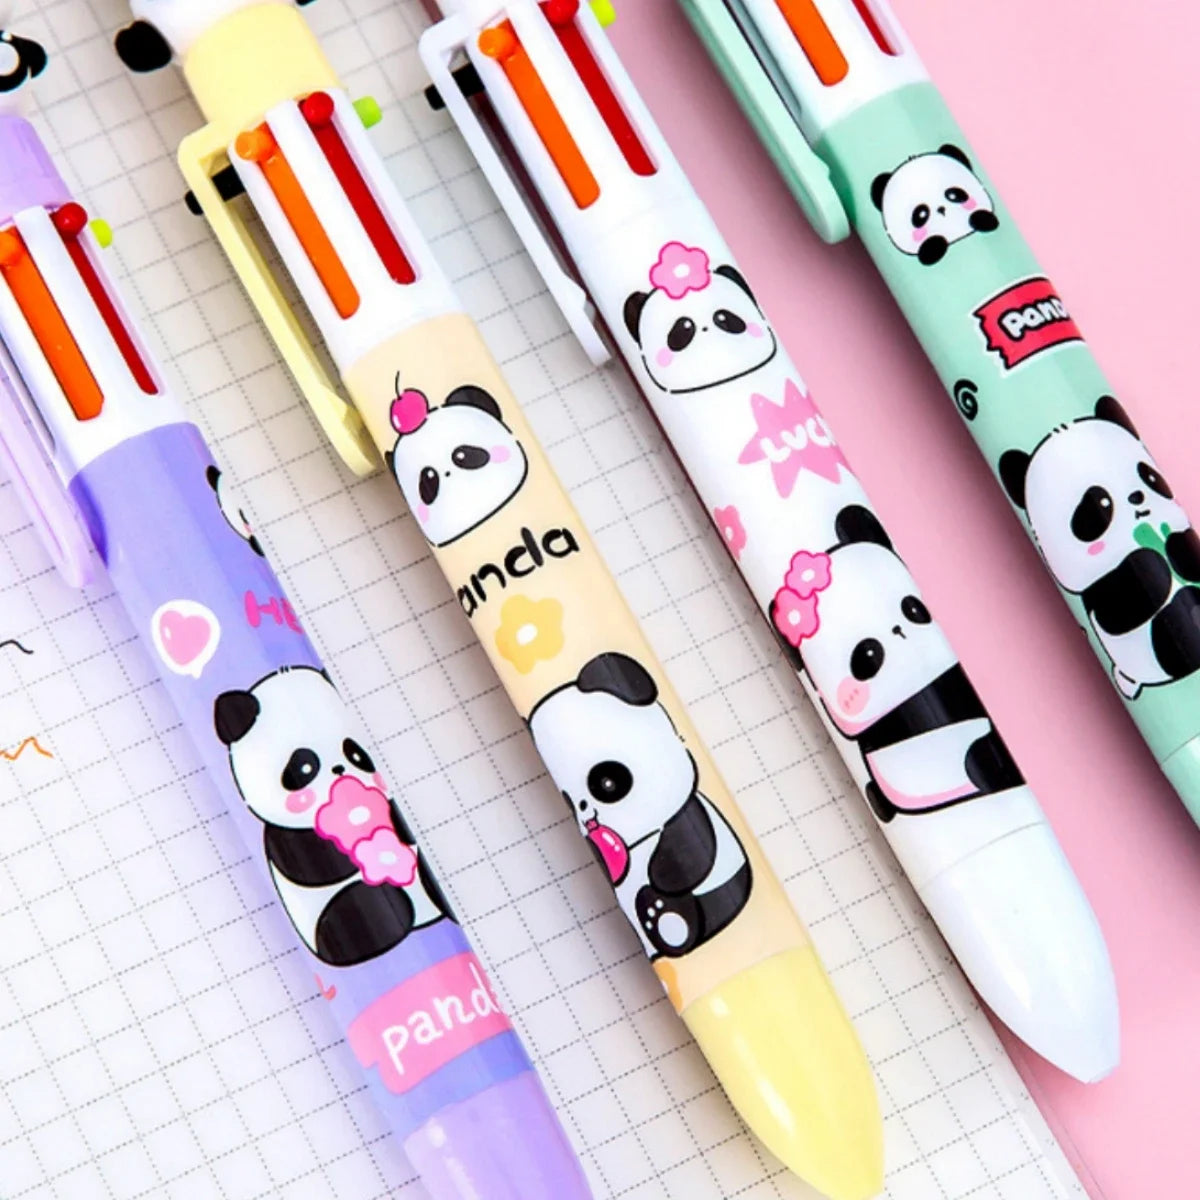 4 pcs/lot Kawaii Panda 6 Colored Mechanical Ballpoint Pen for Students School Office Writing Supplies Gift Stationery Ball Point